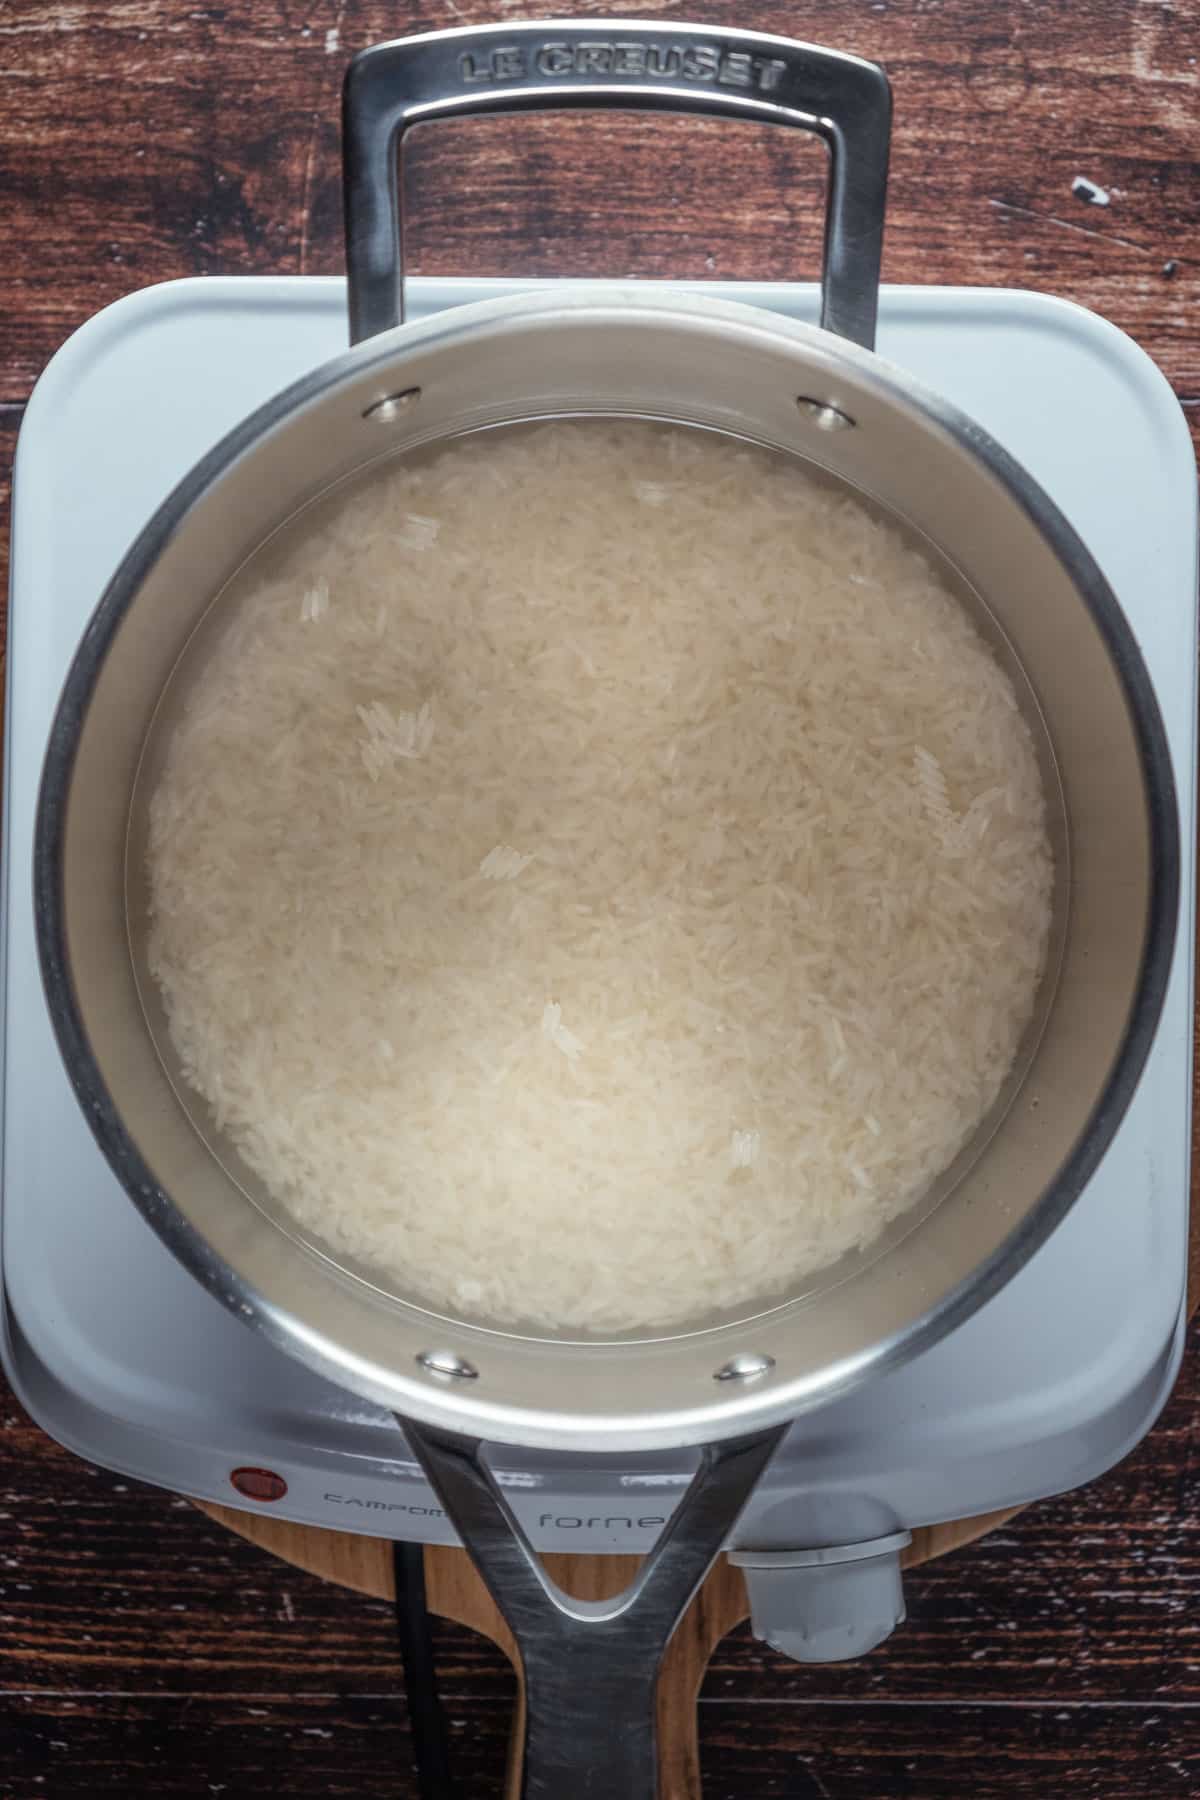 Heating basmati rice and water in a pot.